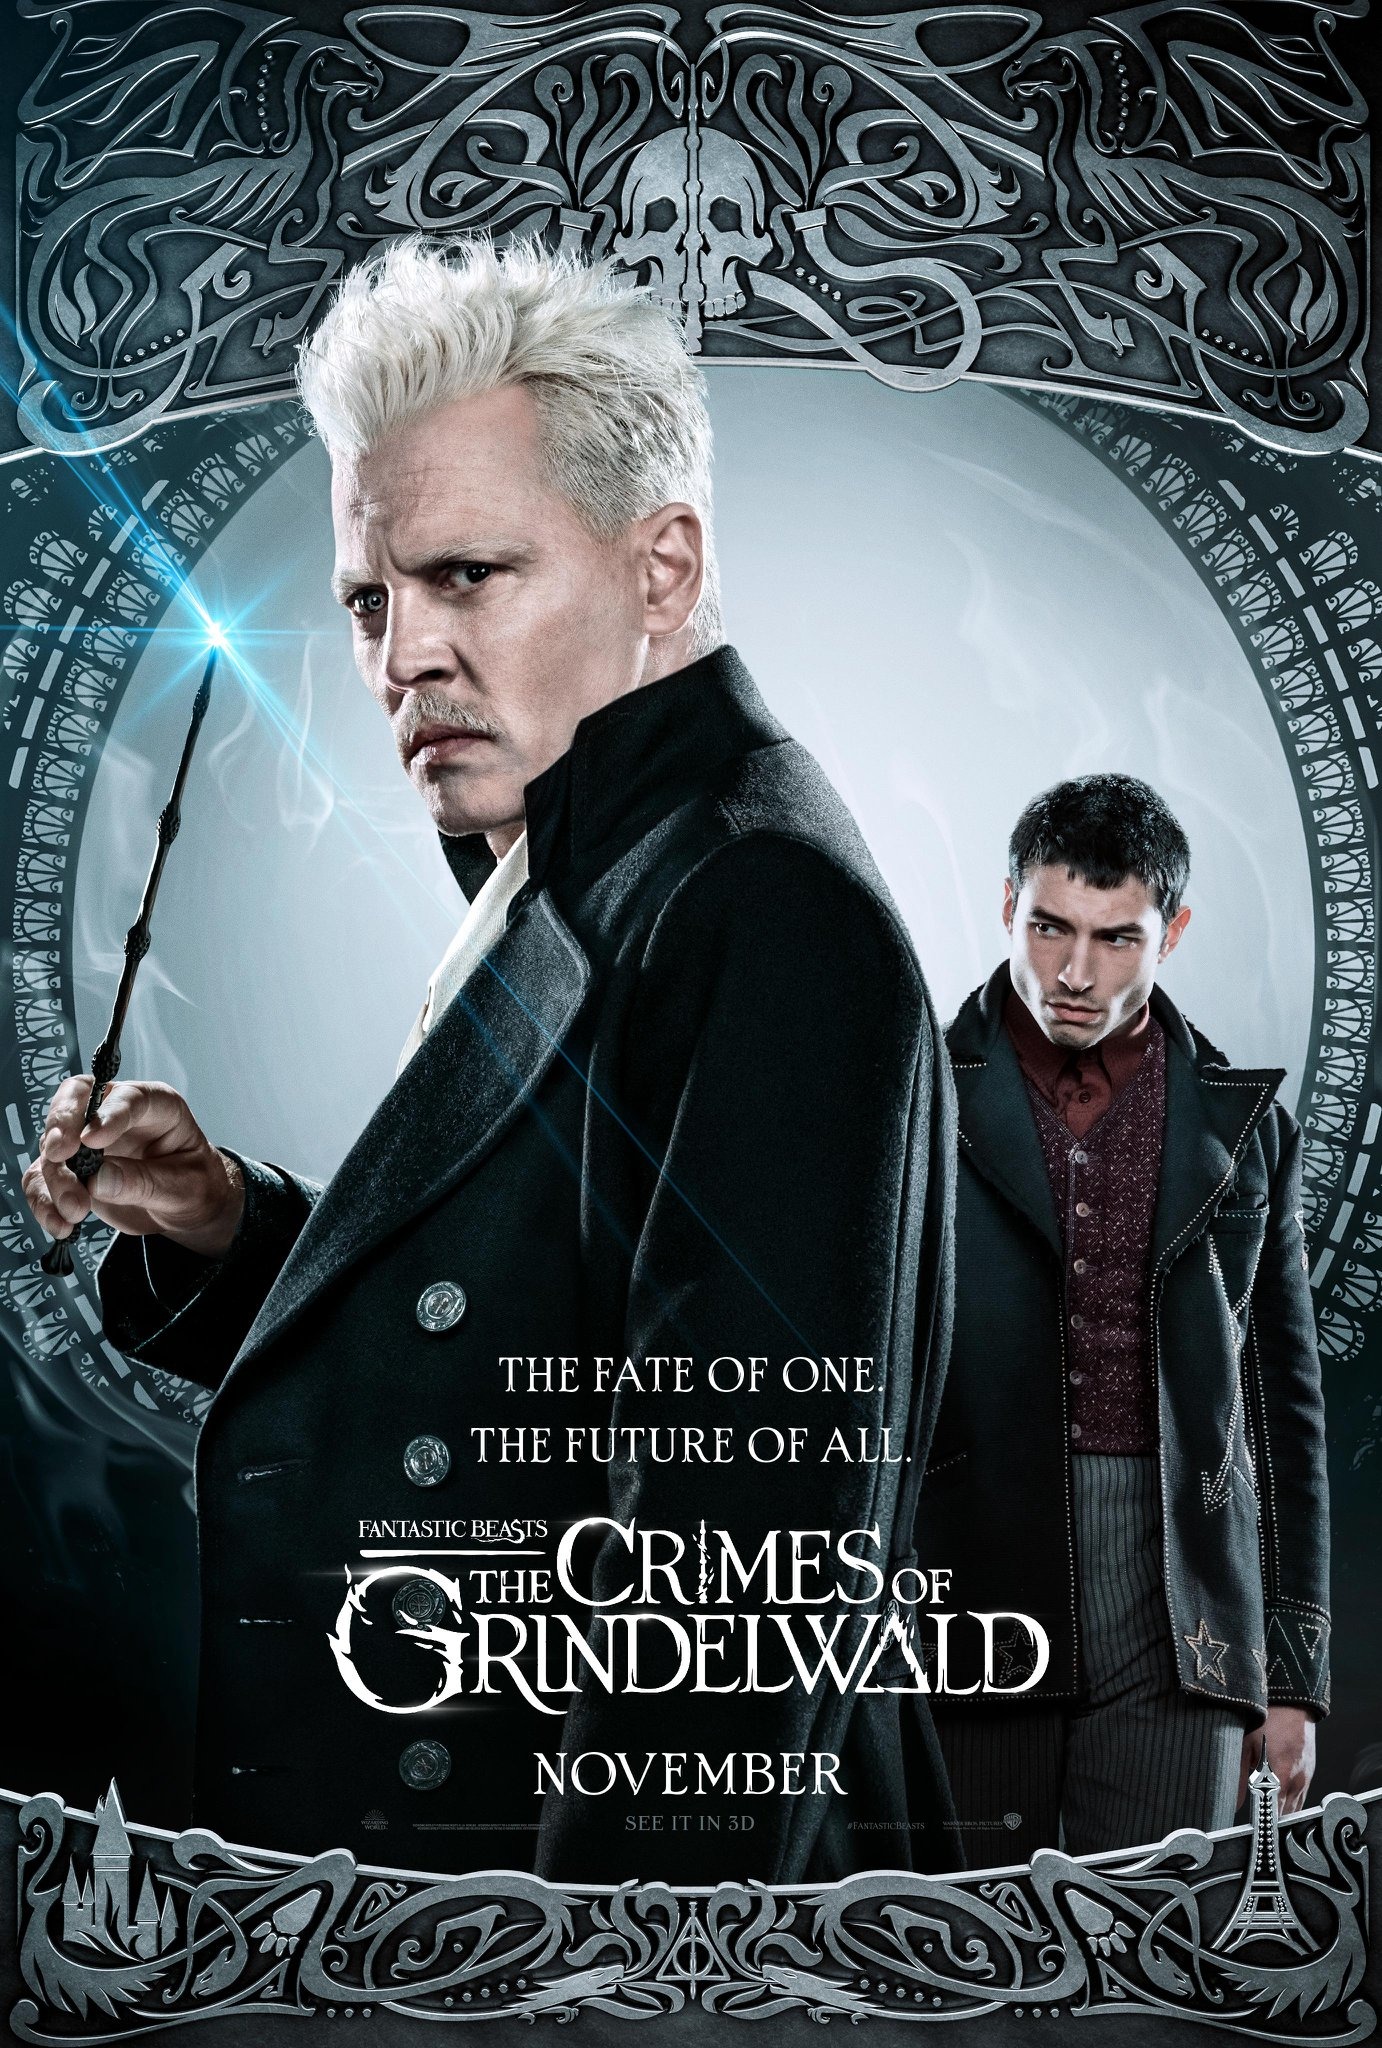 Mega Sized Movie Poster Image for Fantastic Beasts: The Crimes of Grindelwald (#18 of 32)